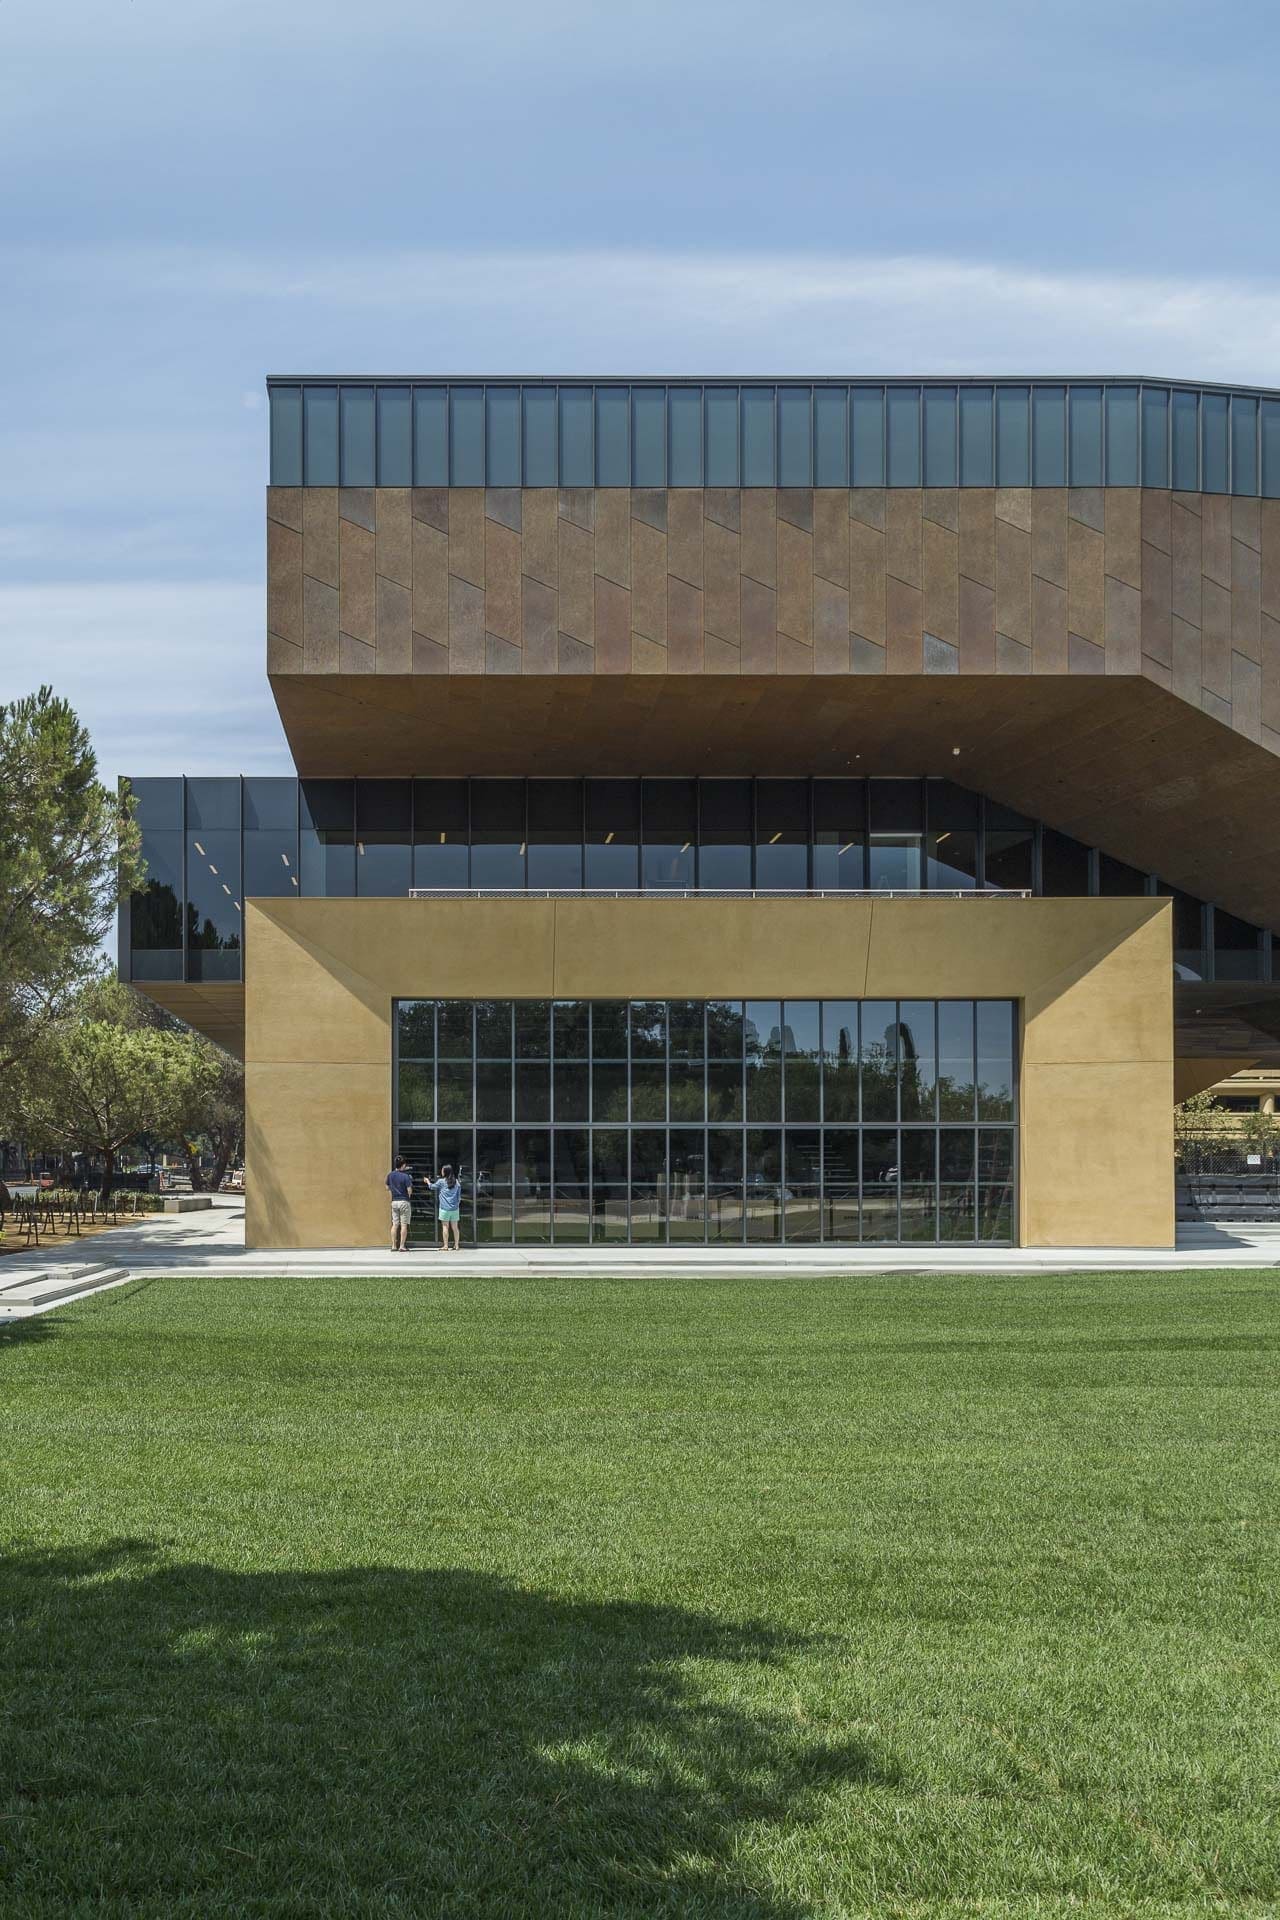 McMurtry Building in Stanford, California, designed by Diller Scofidio + Renfro.